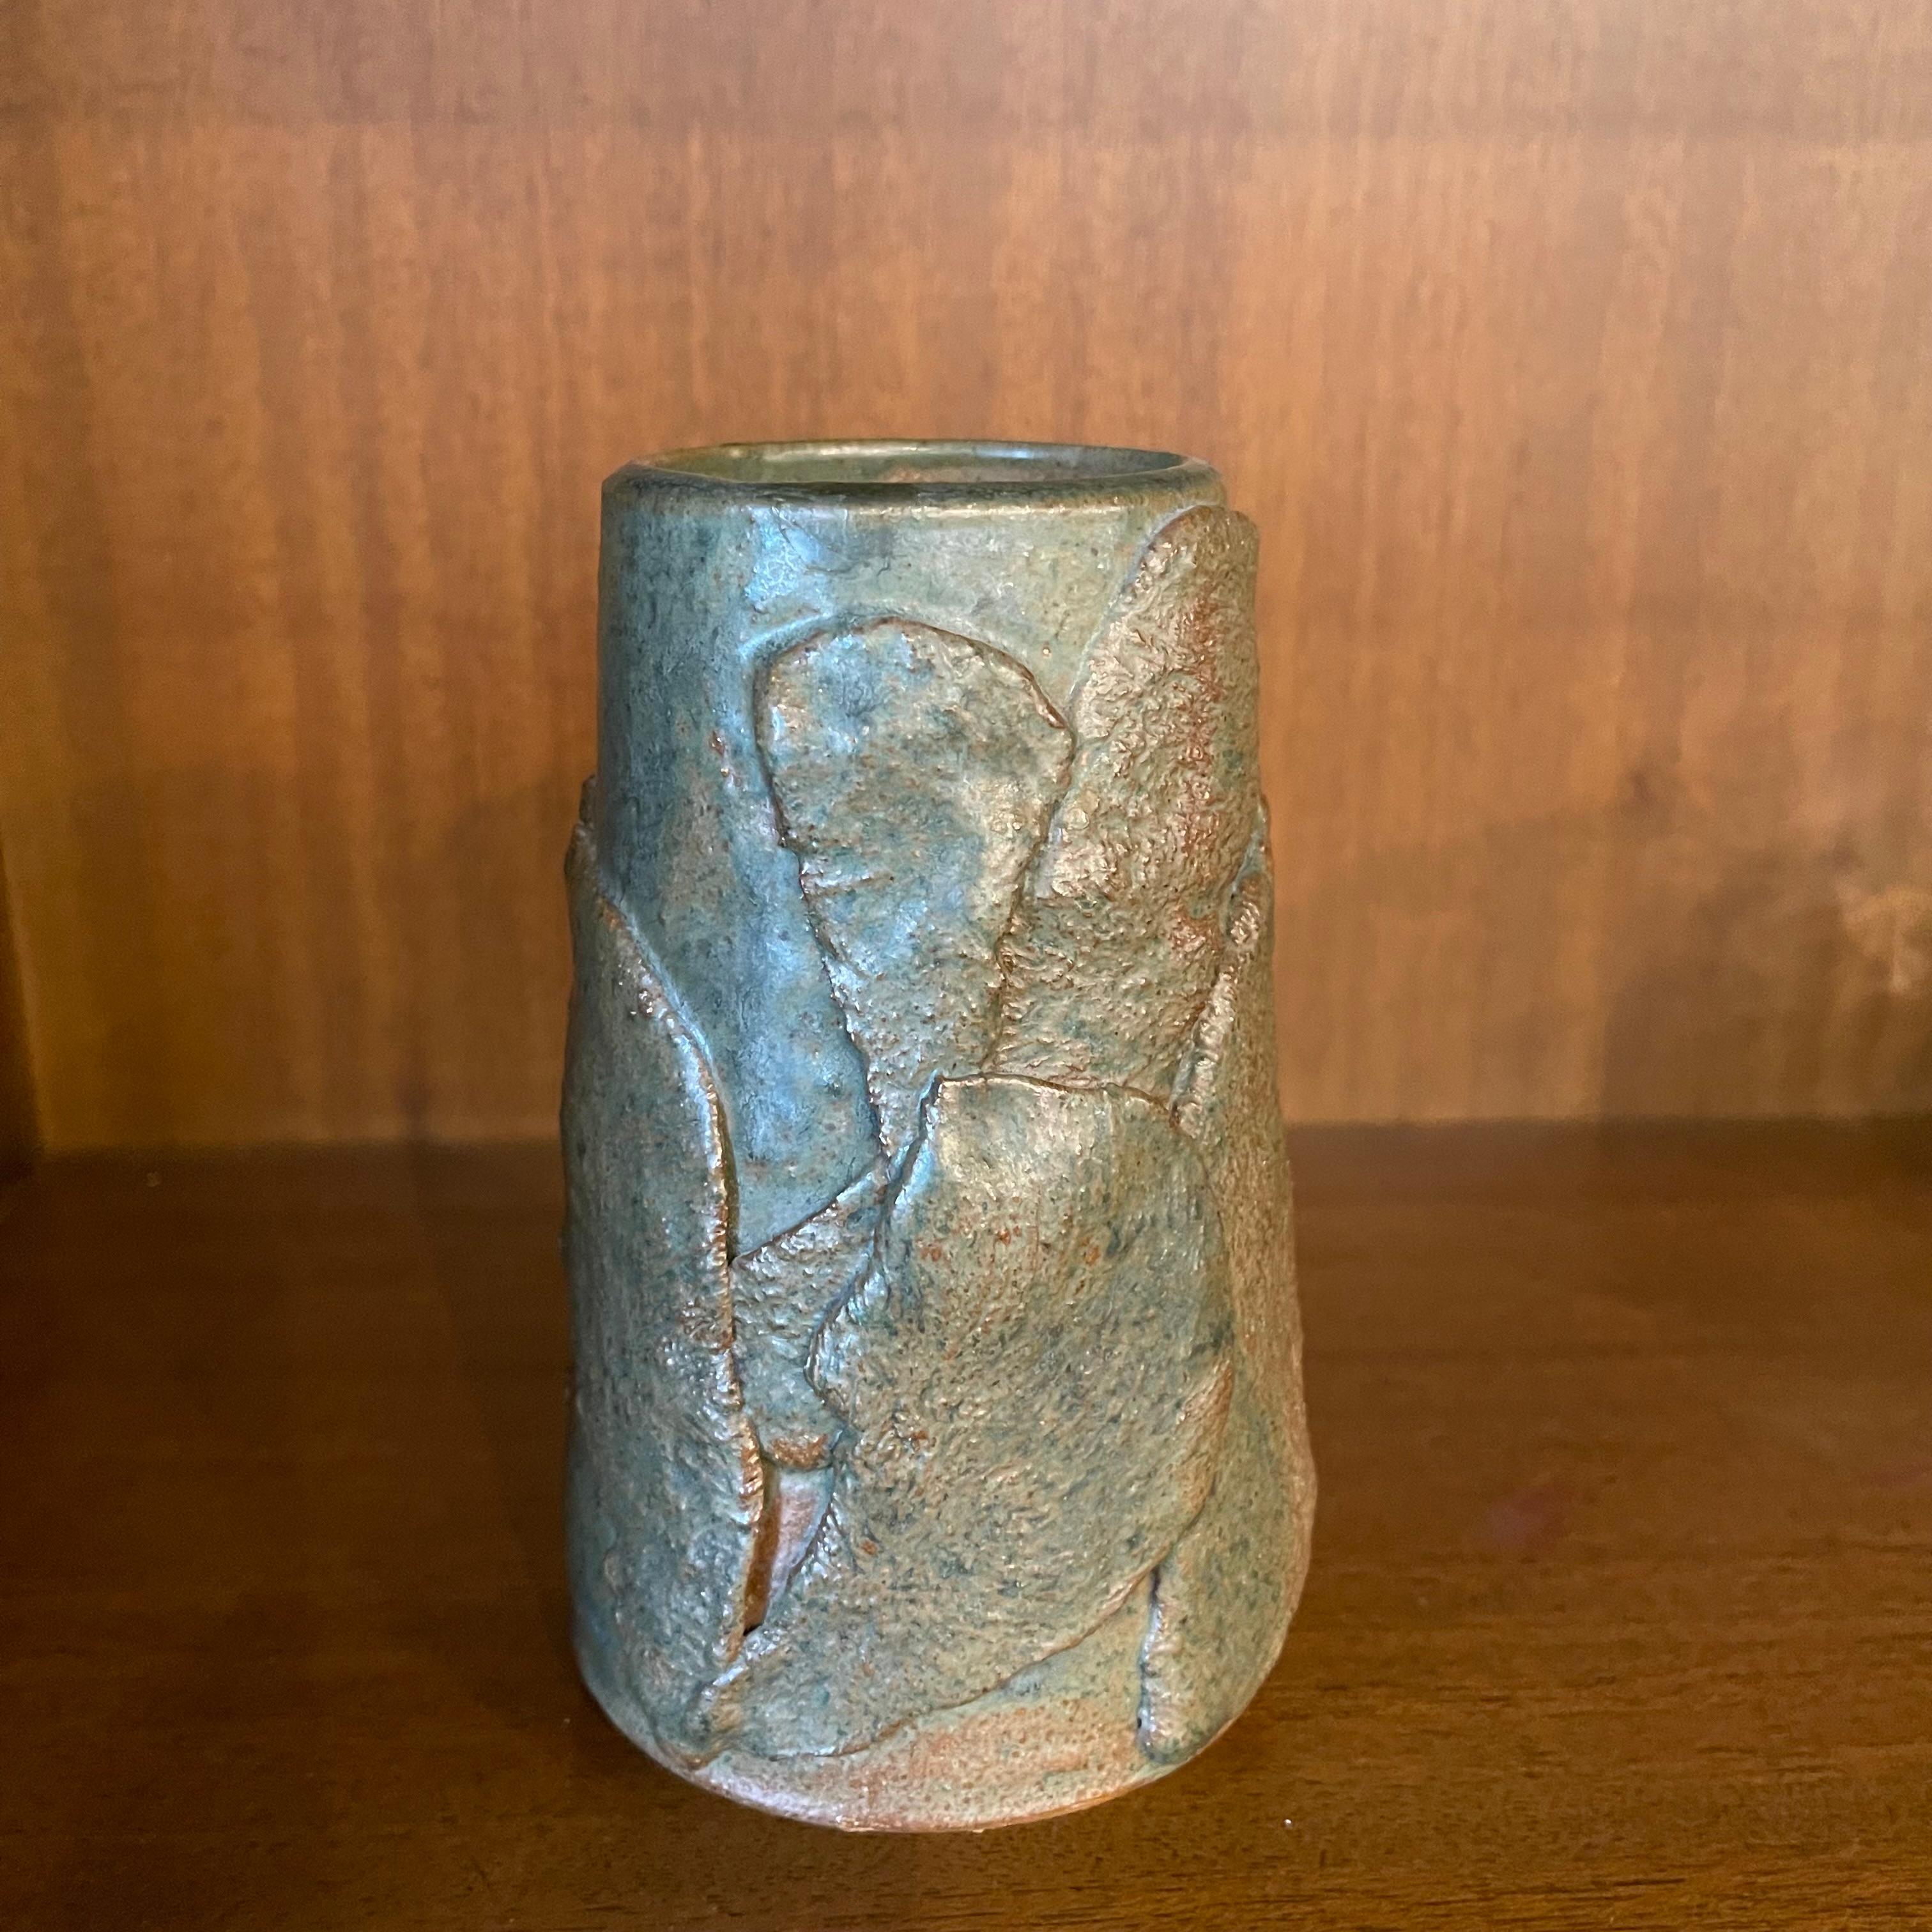 Signed mid-century modern, hand-made, abstract art pottery vase features a rustic, high glaze, layered surface in green and brown tones resembling leaves. The vase tapers to a 2 inch opening.